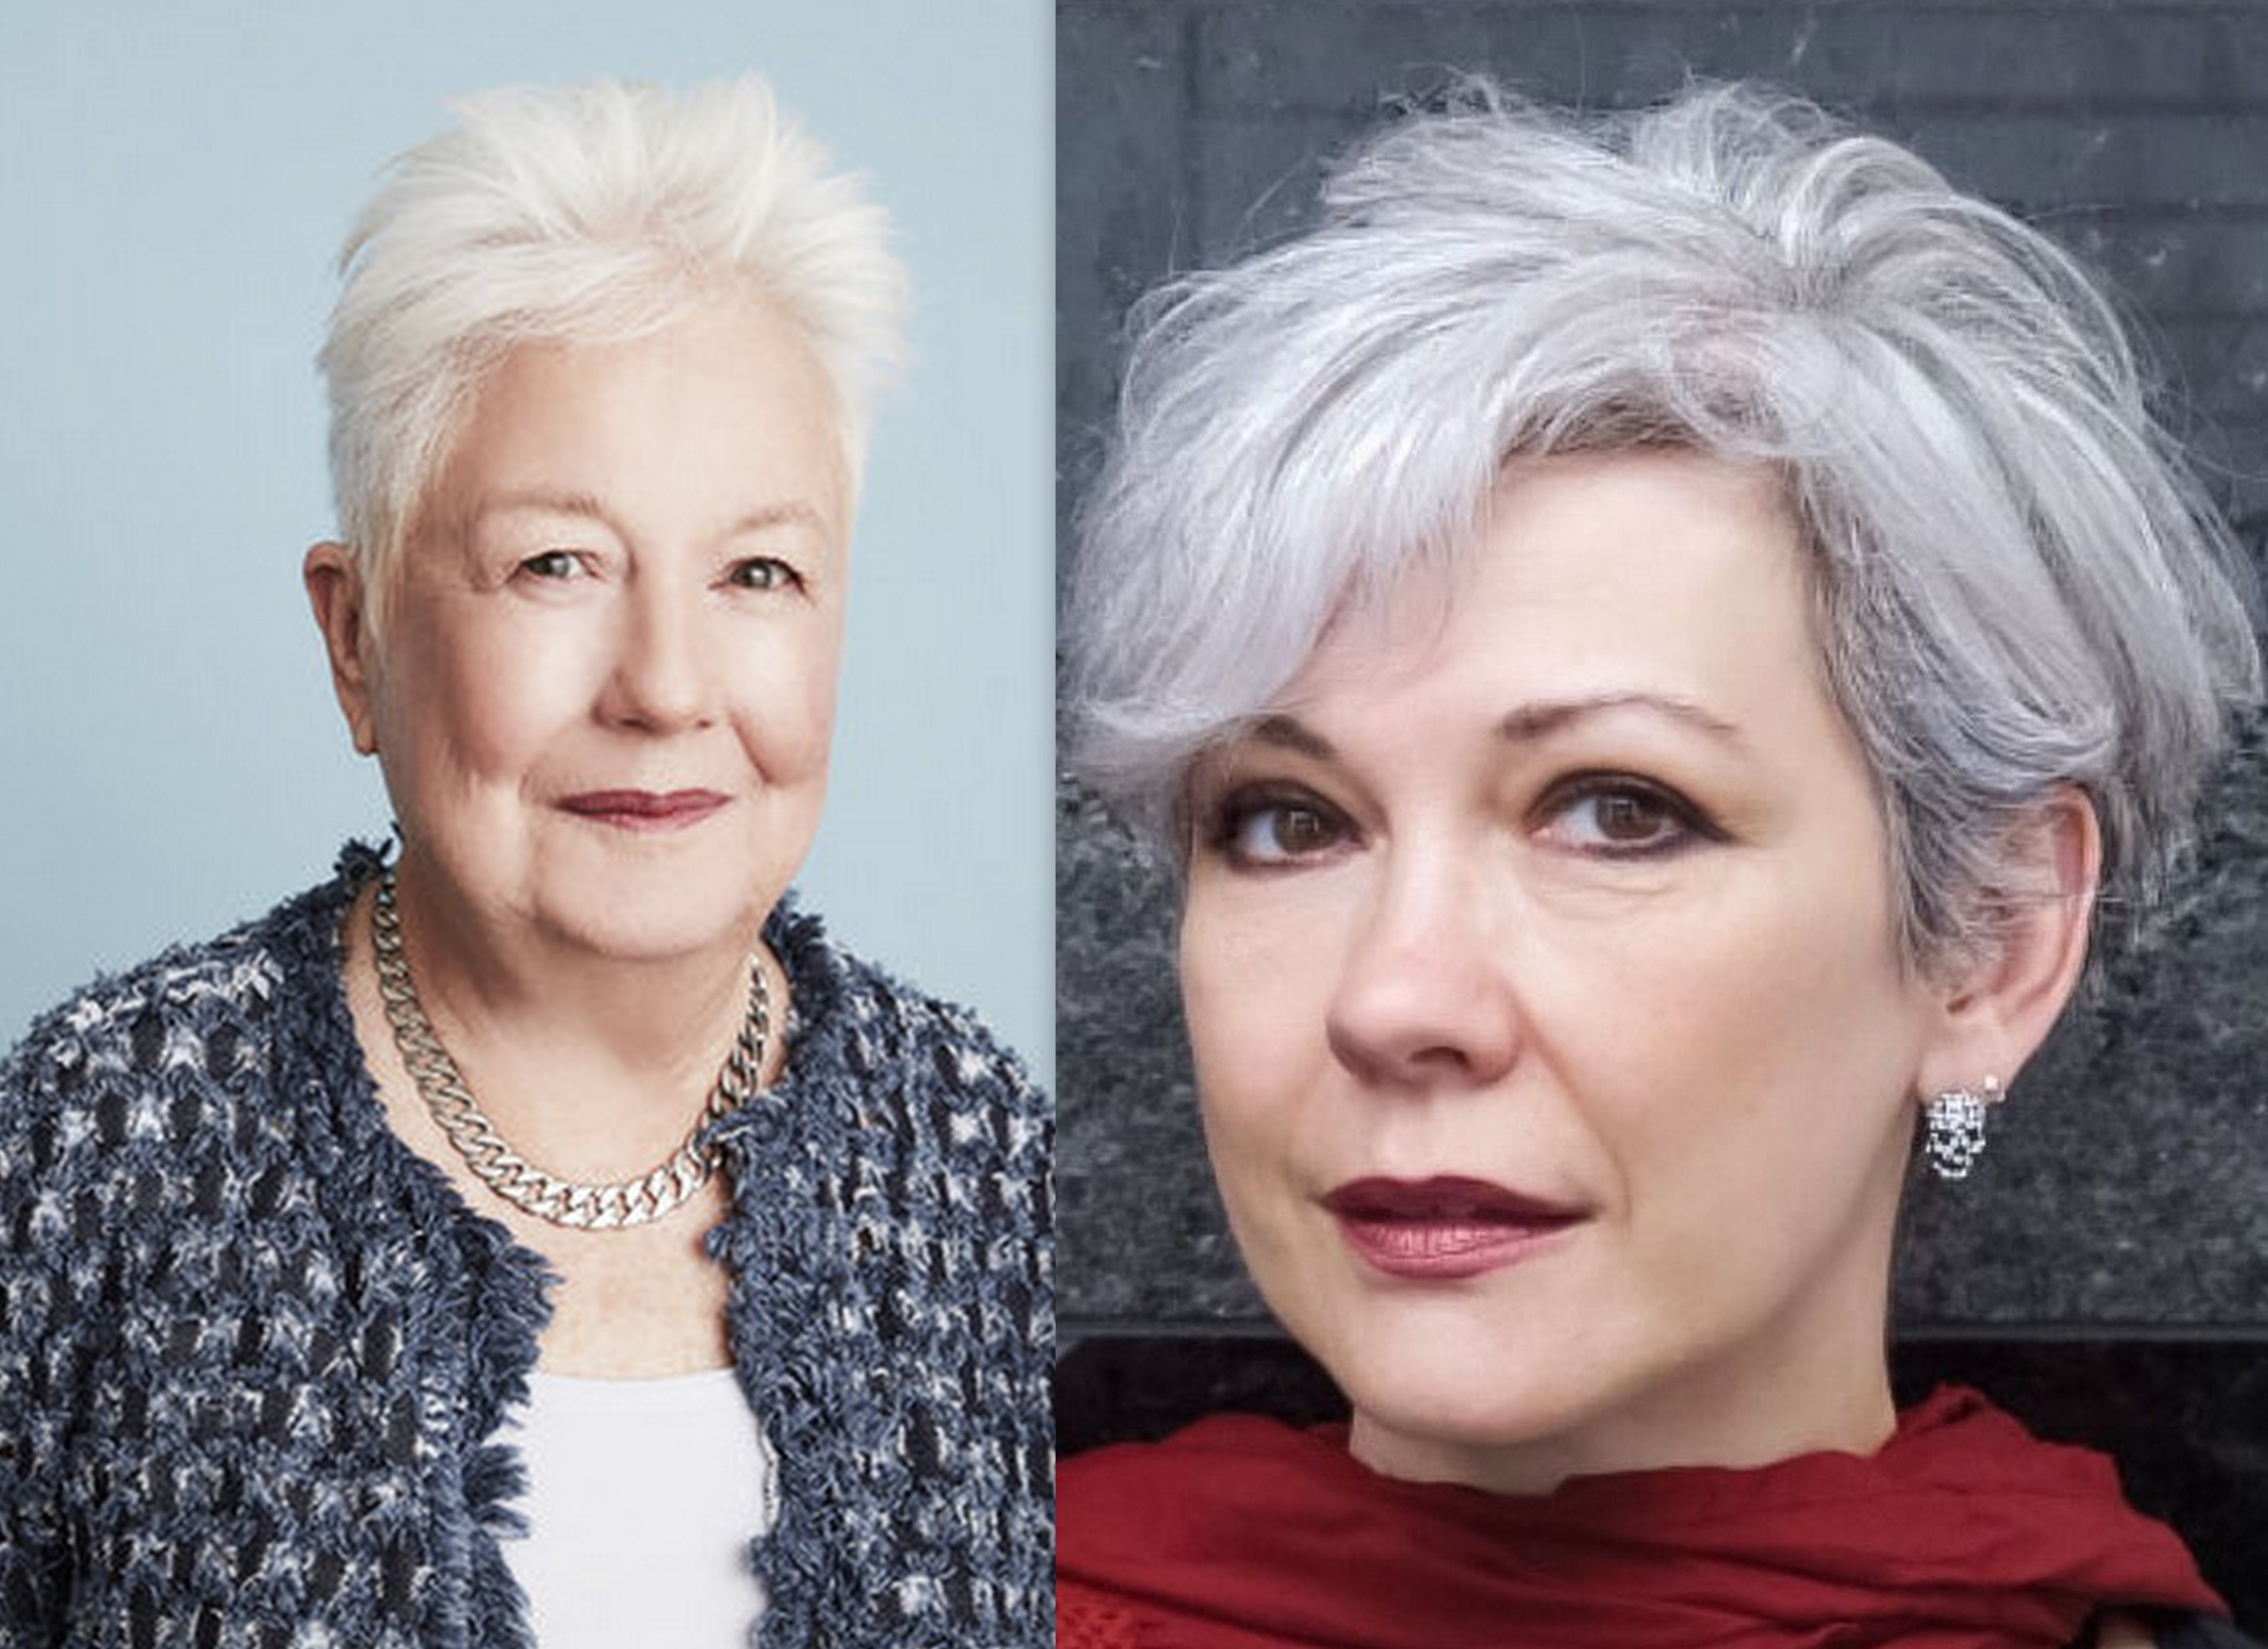 50 Latest Hairstyles For Over 60 With Round Face 2019 - Plus throughout Hairstyles For Old And Fat